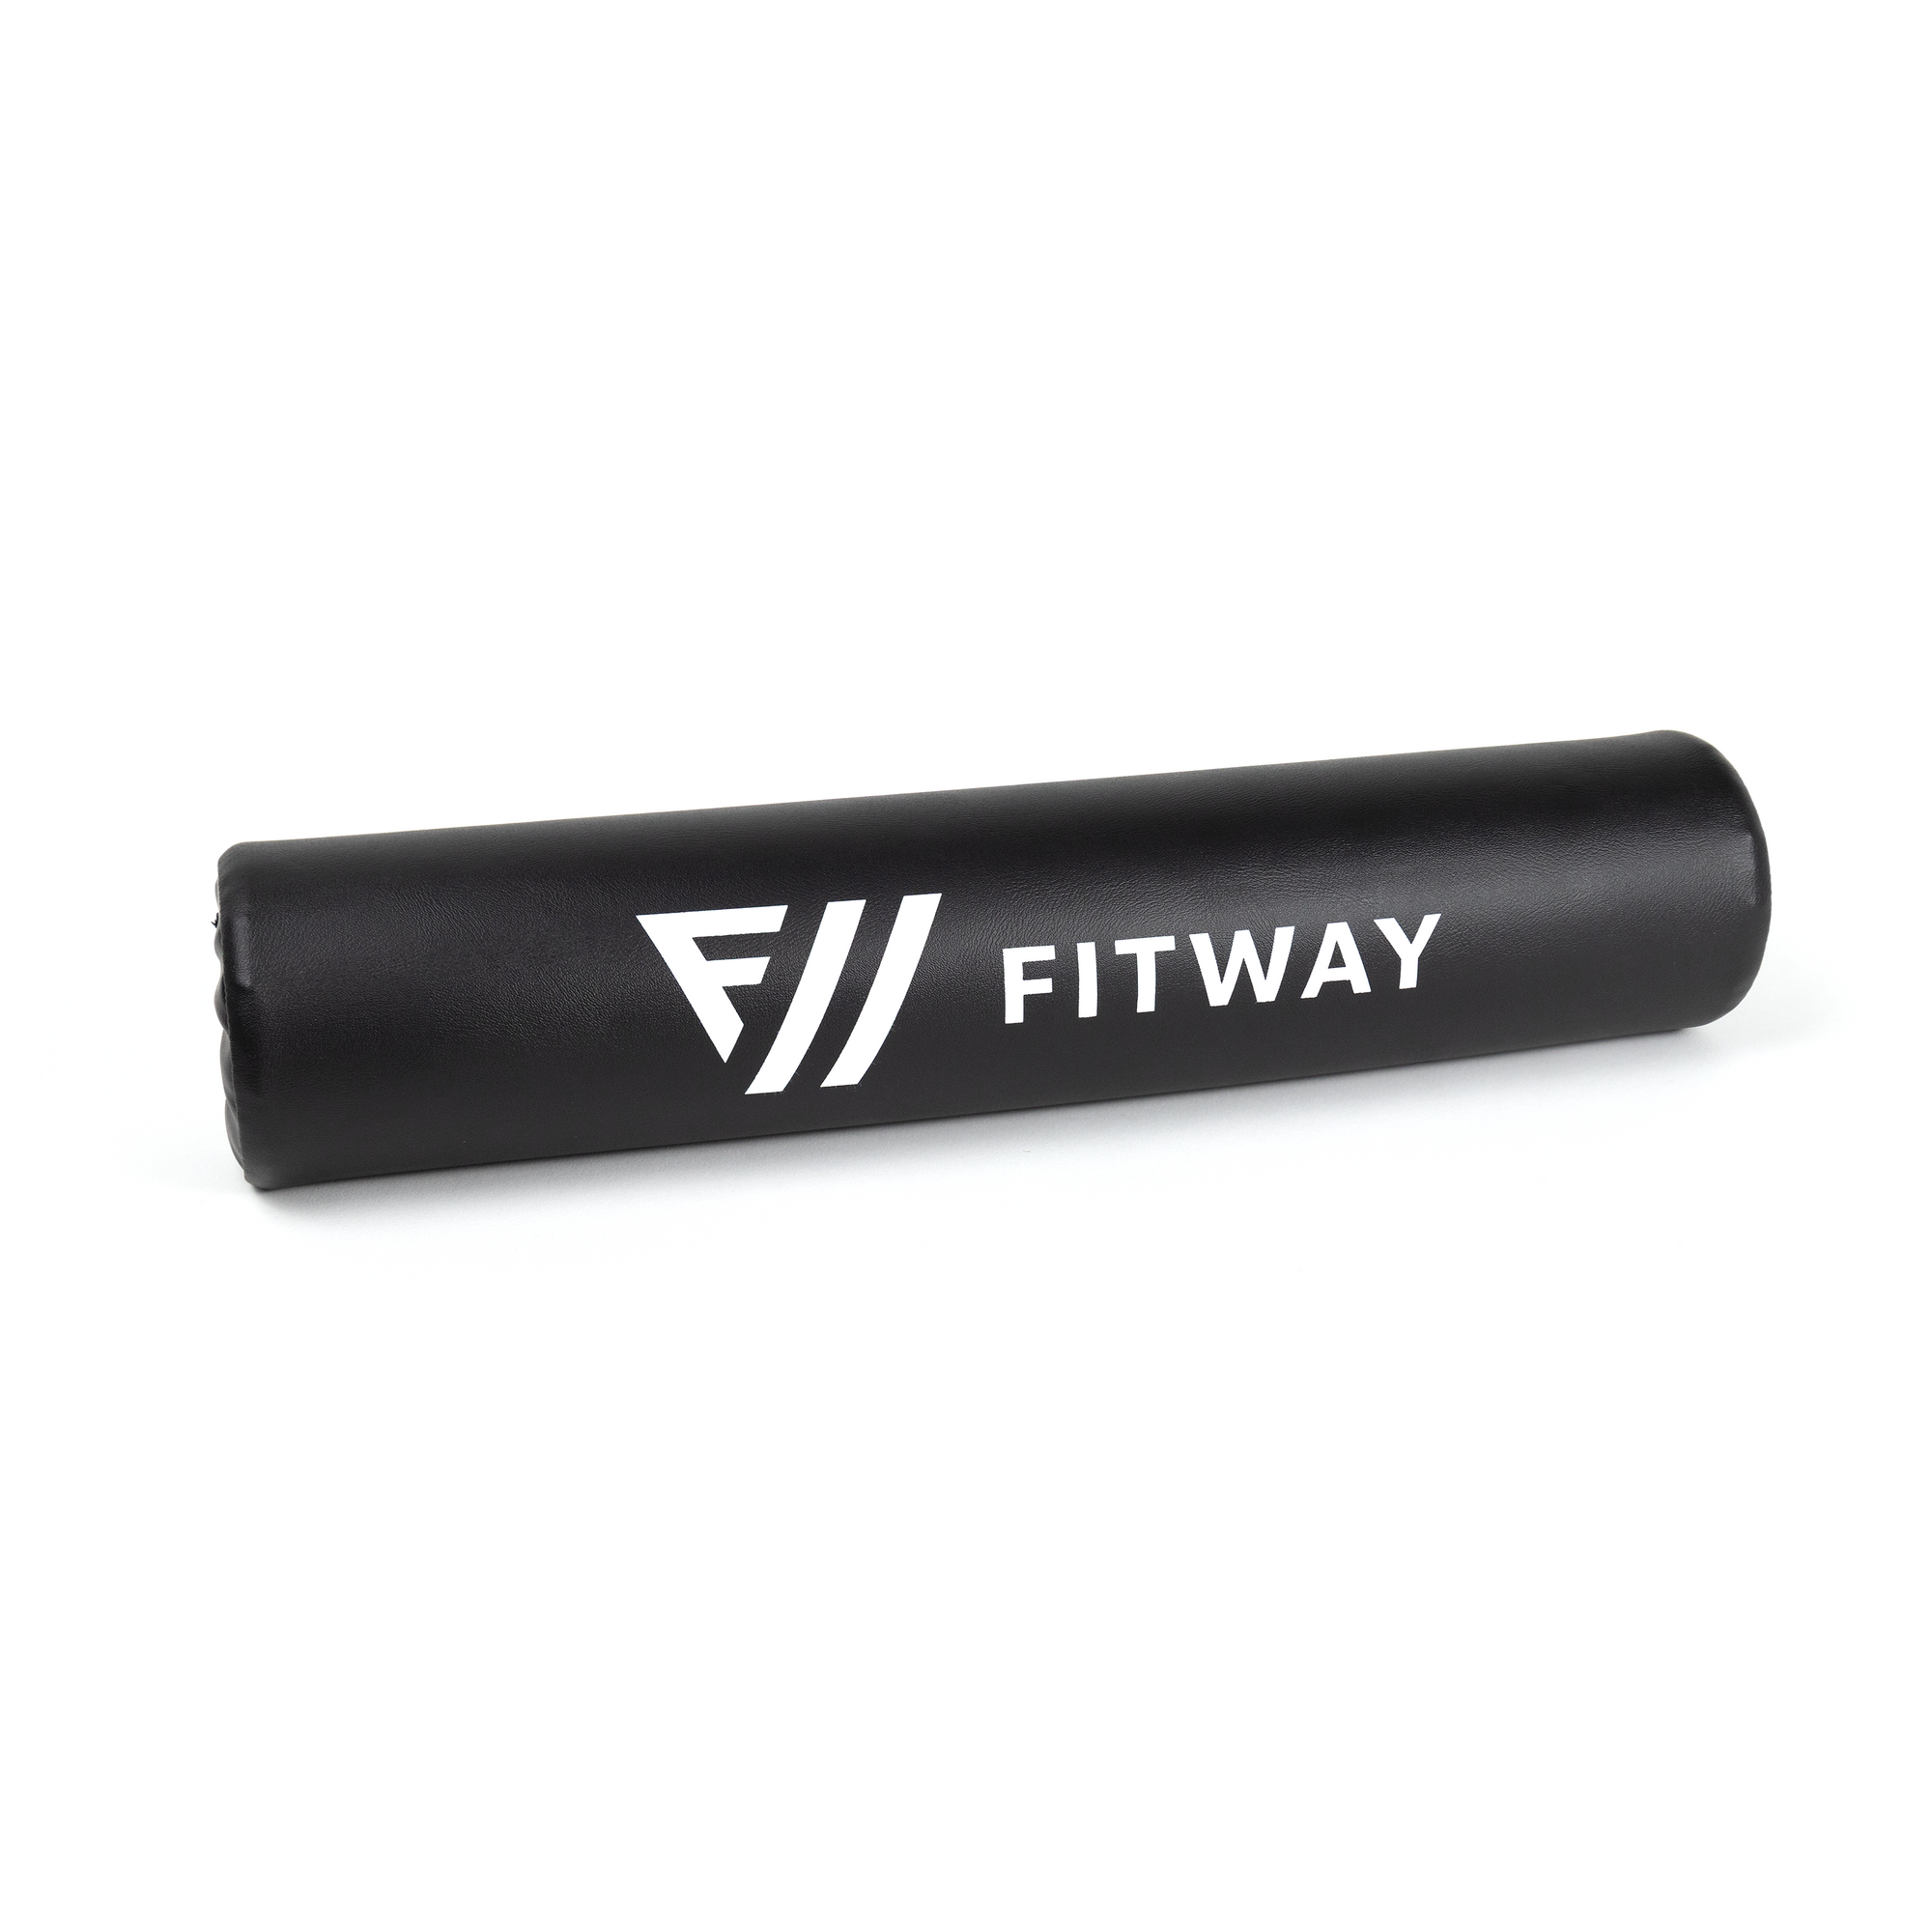 Fitway Deluxe Olympic Barbell Pad, high density foam padded design for all olympic bars